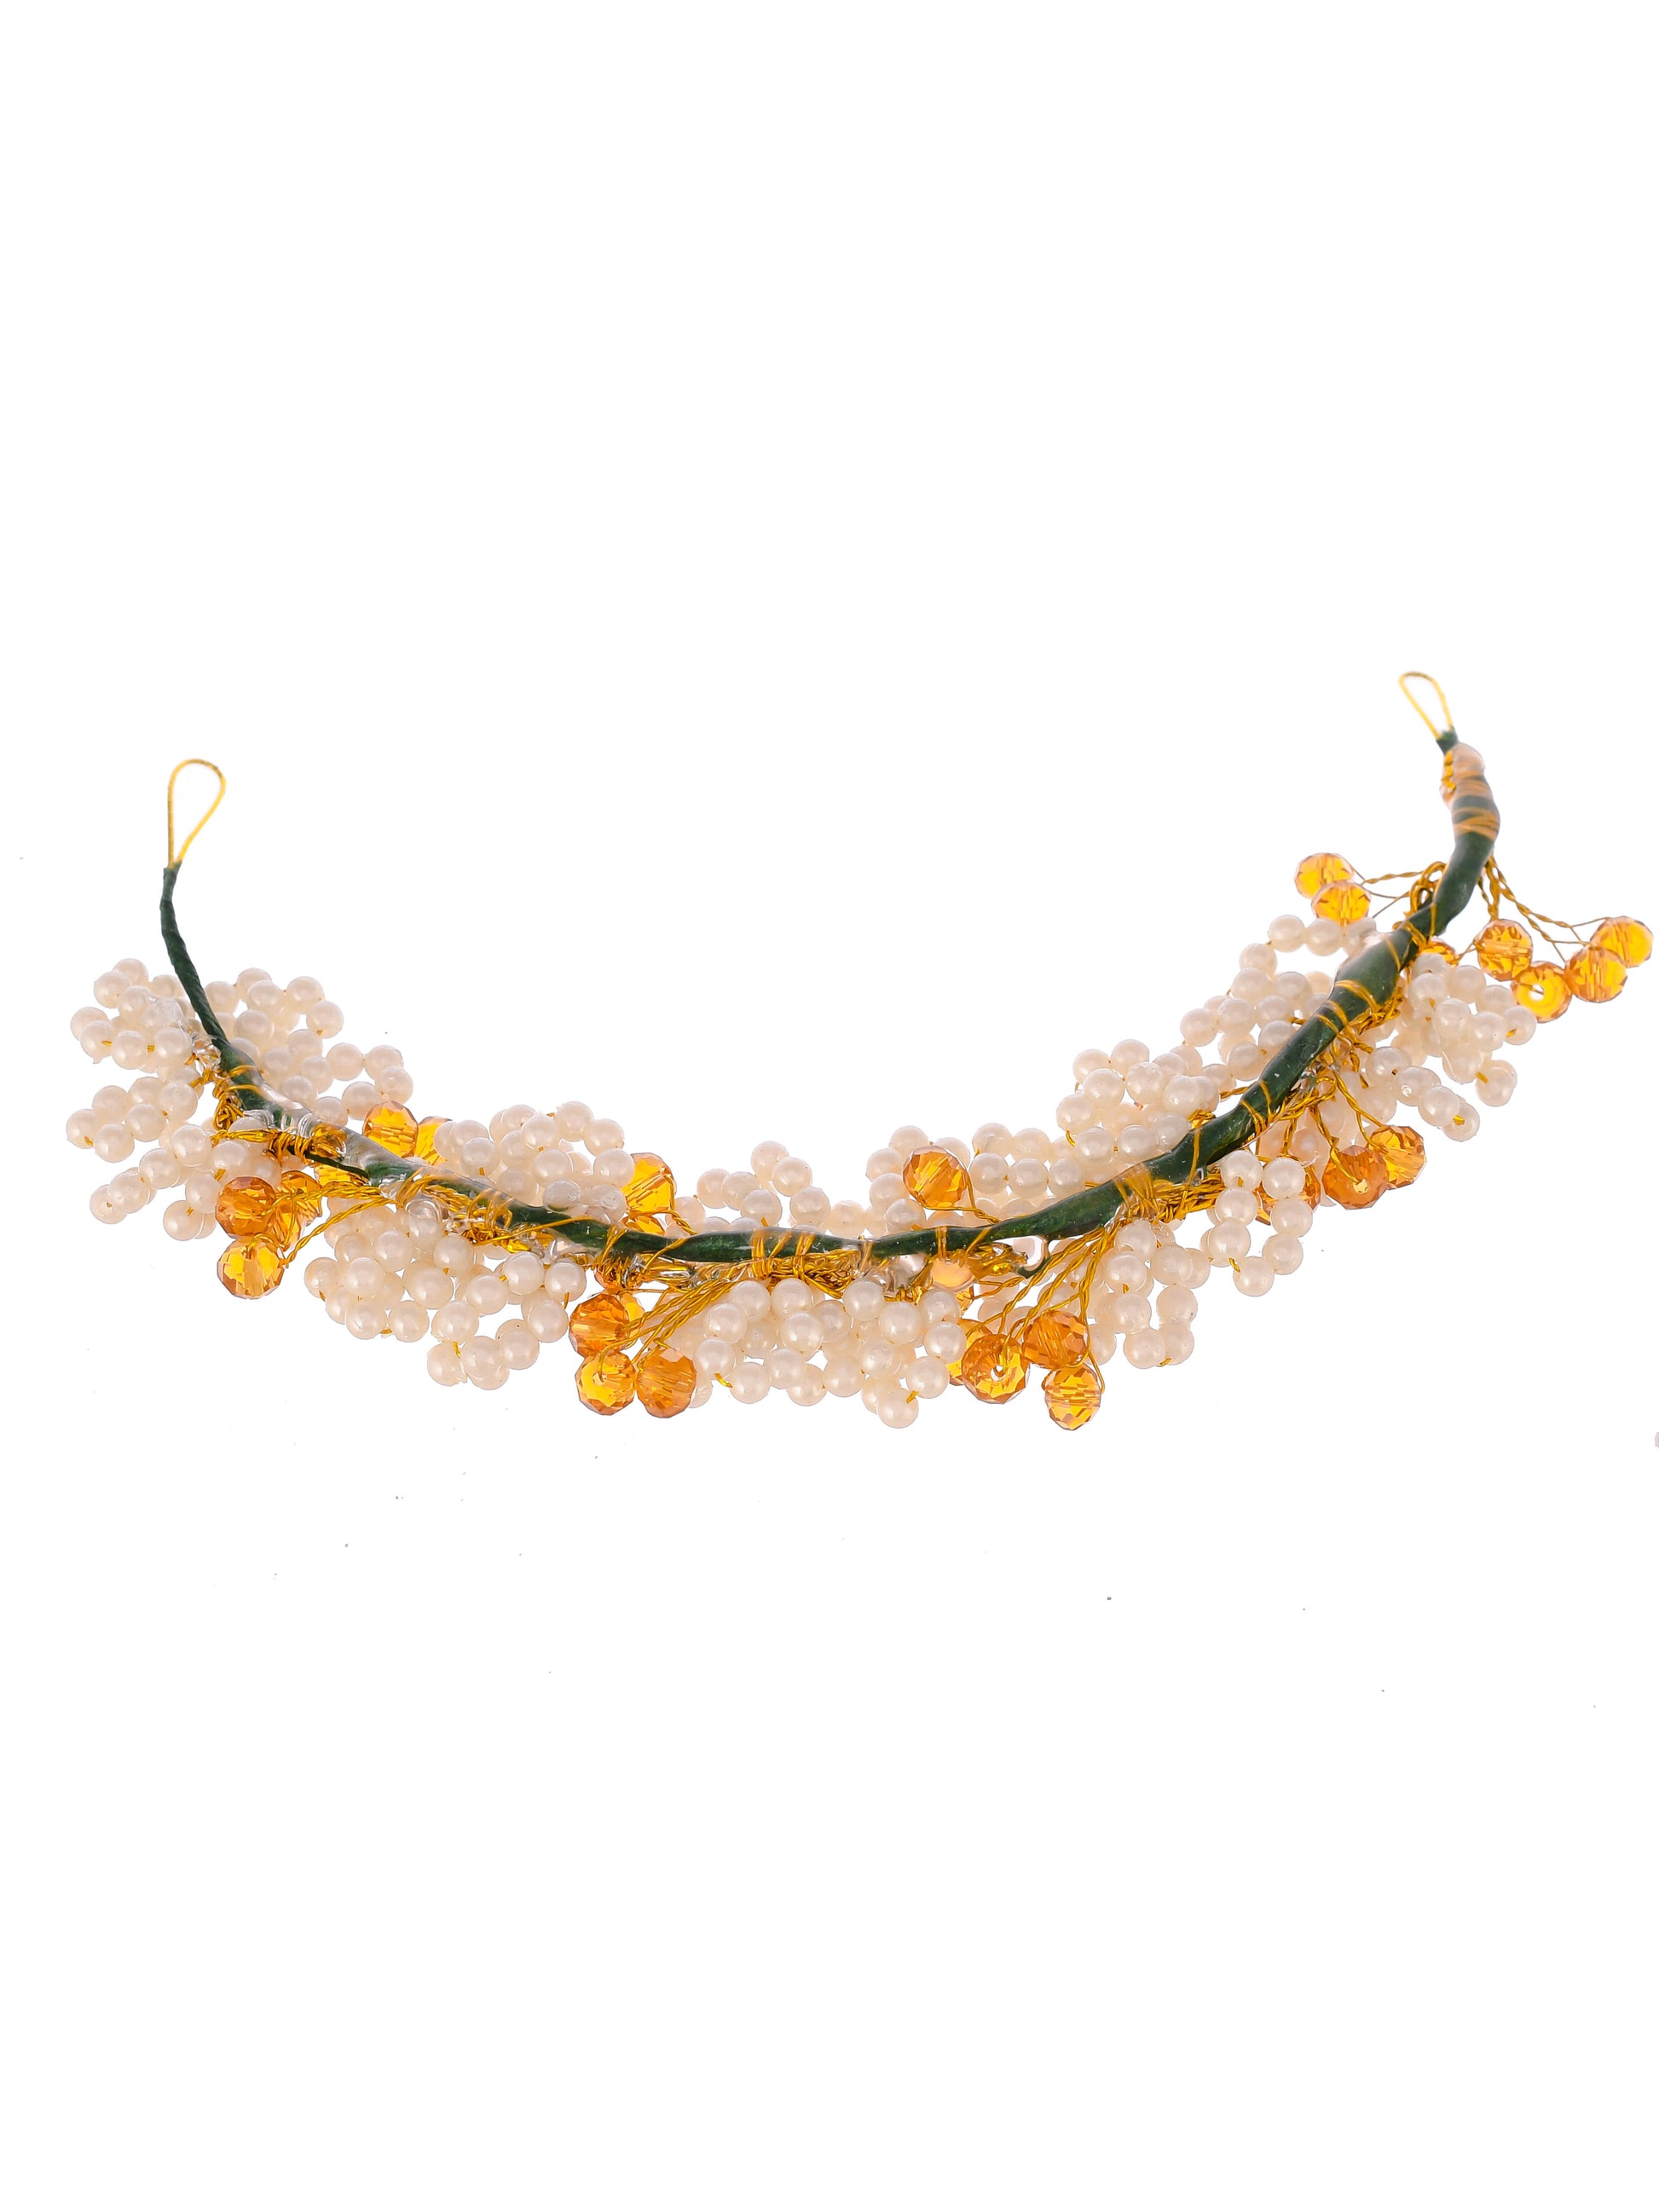 Women Gold Yellow Colored Handcrafted Beaded Hair Tiara